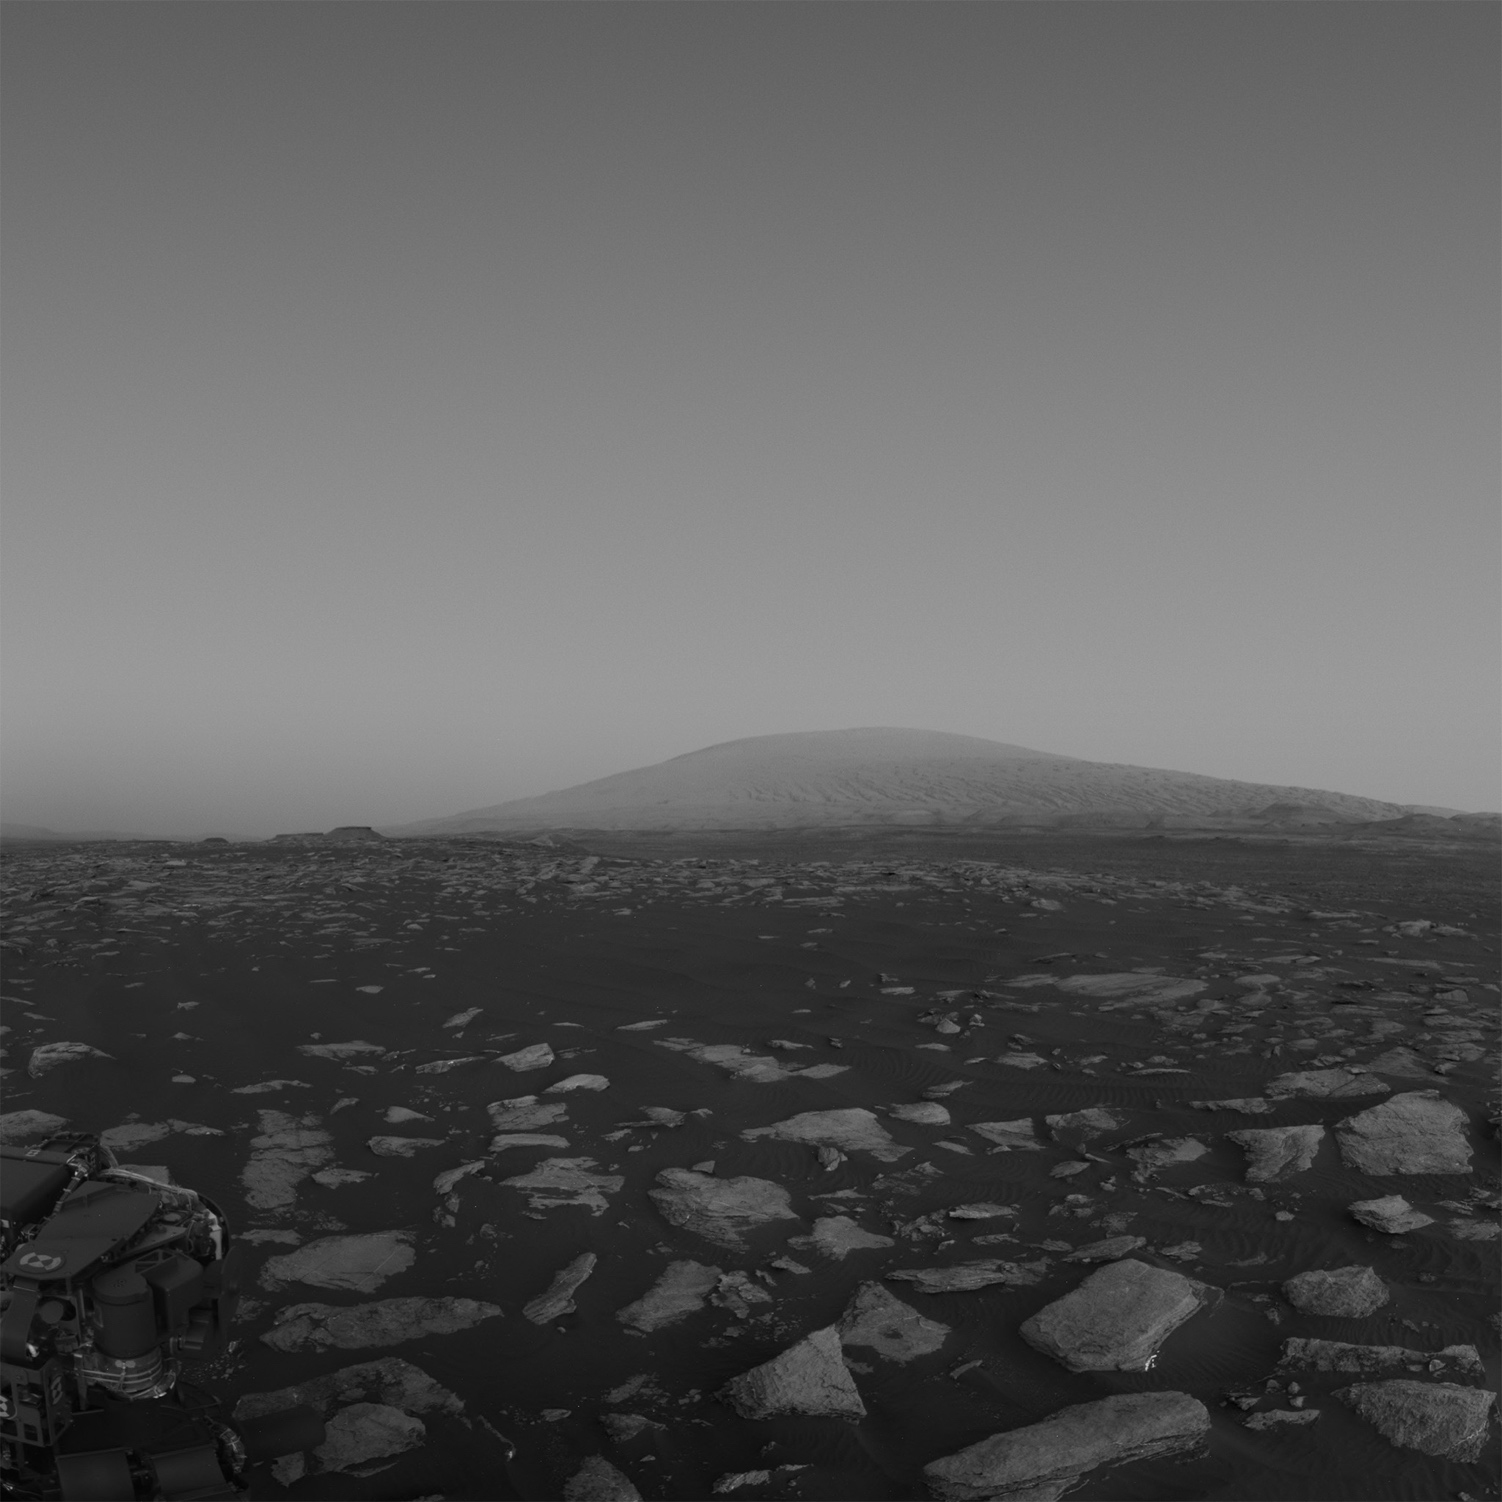 Black and white image of Mars